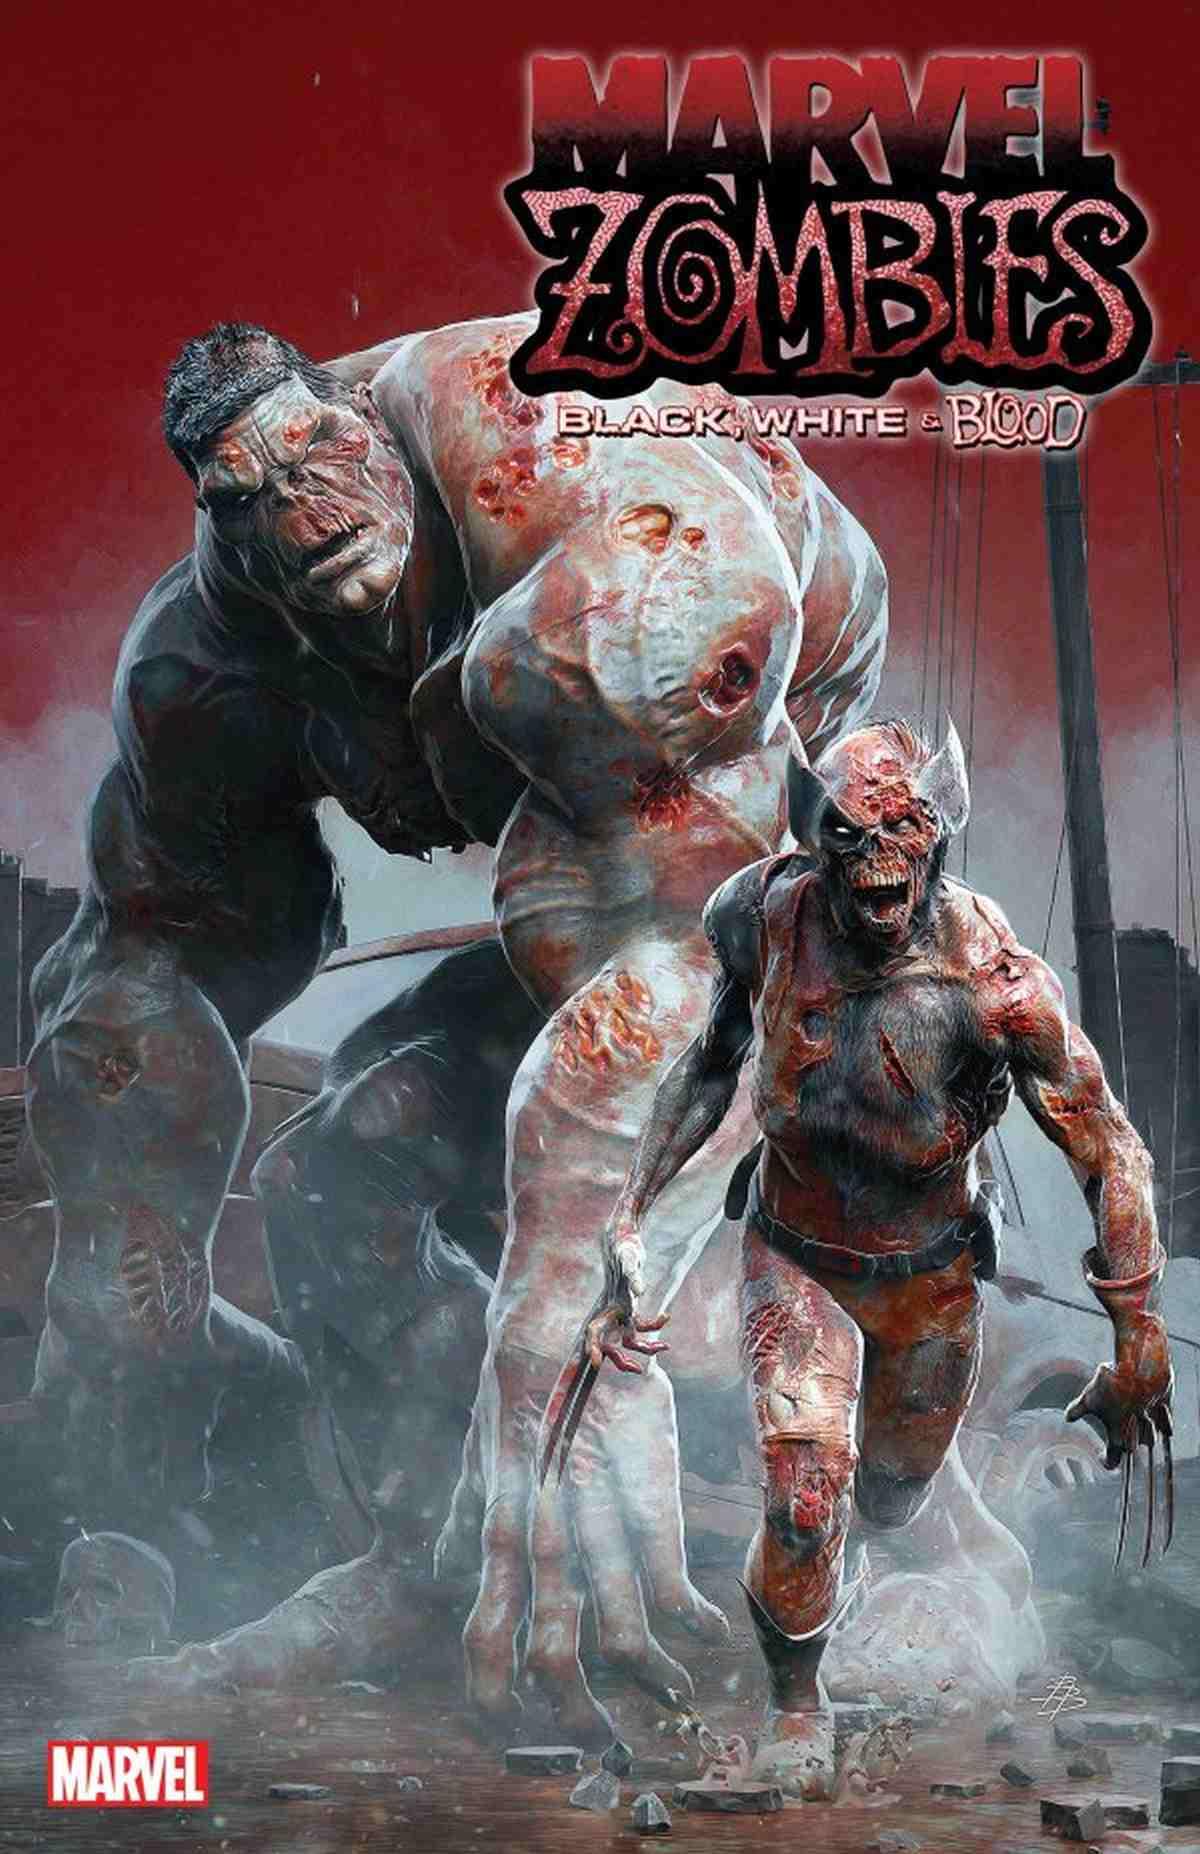 marvel-zombies-black-white-and-blood-preview-006.jpg